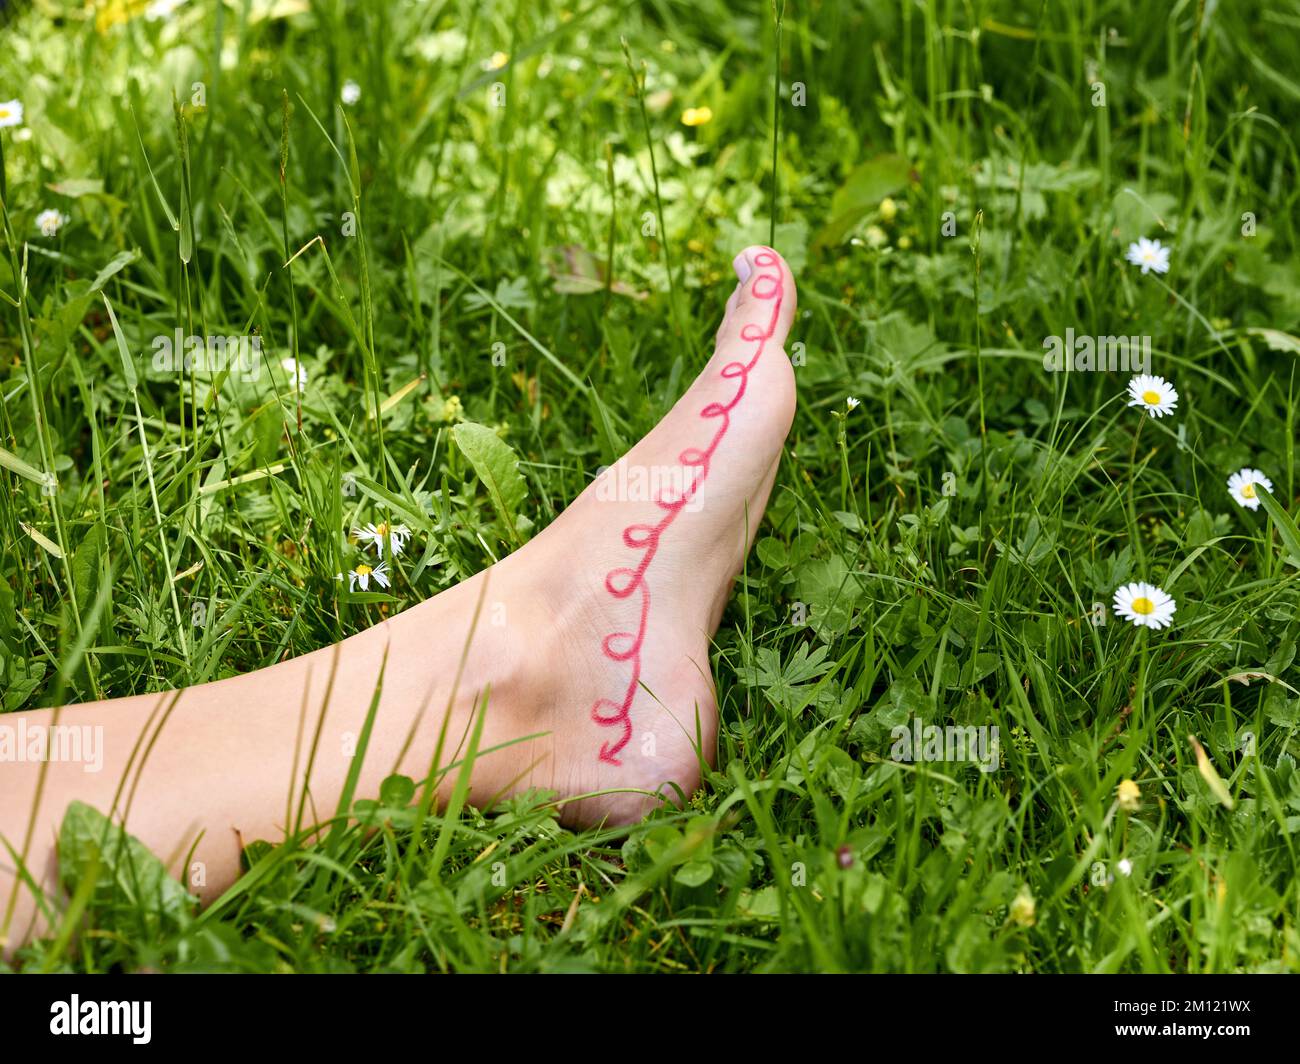 Barefoot walking - close-up of woman's foot with marked zone for reflexology on arch of foot Stock Photo